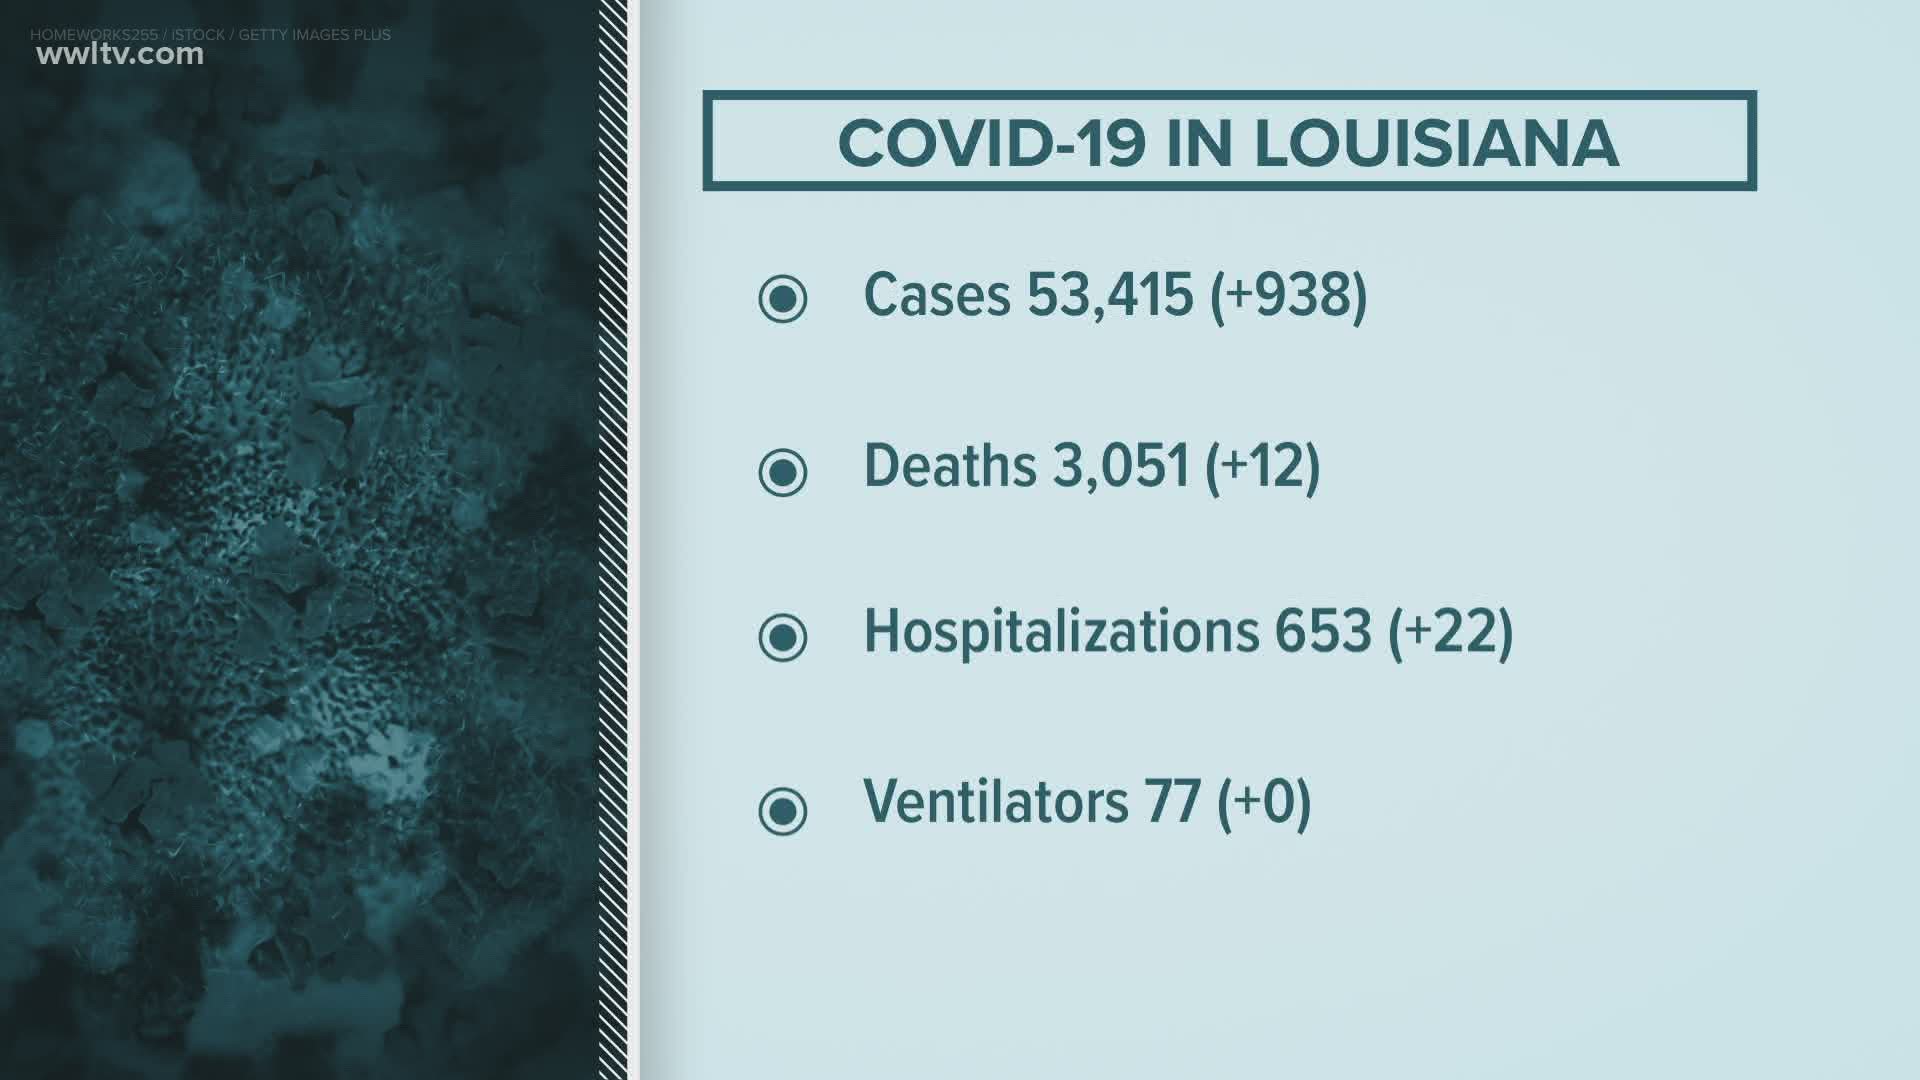 940 more COVID-19 cases reported Thursday, hospitalized patients increase